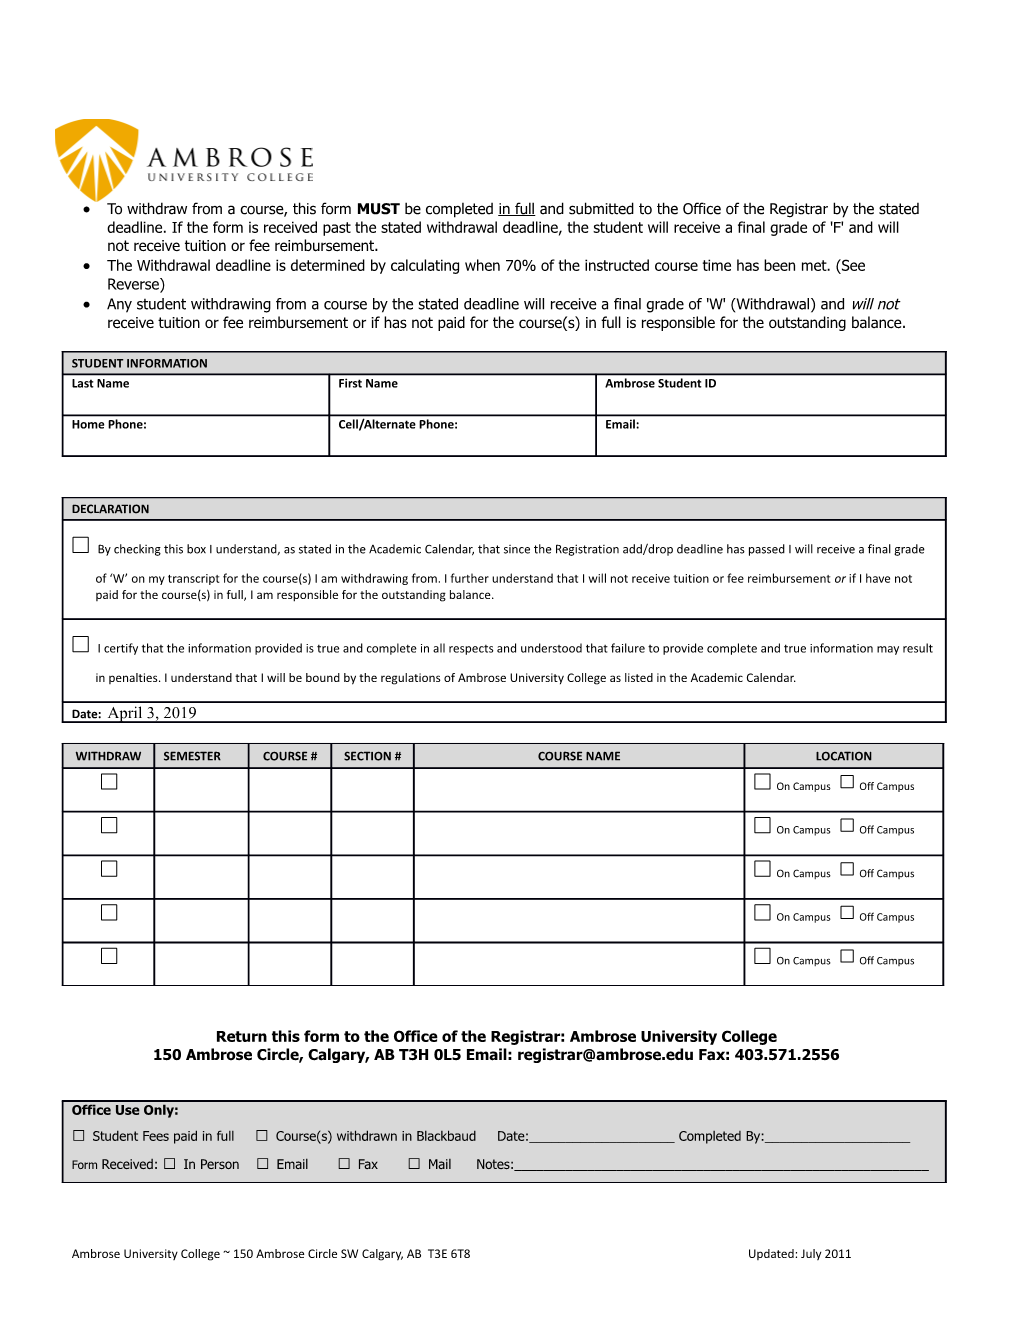 Return This Form to the Office of the Registrar: Ambrose University College